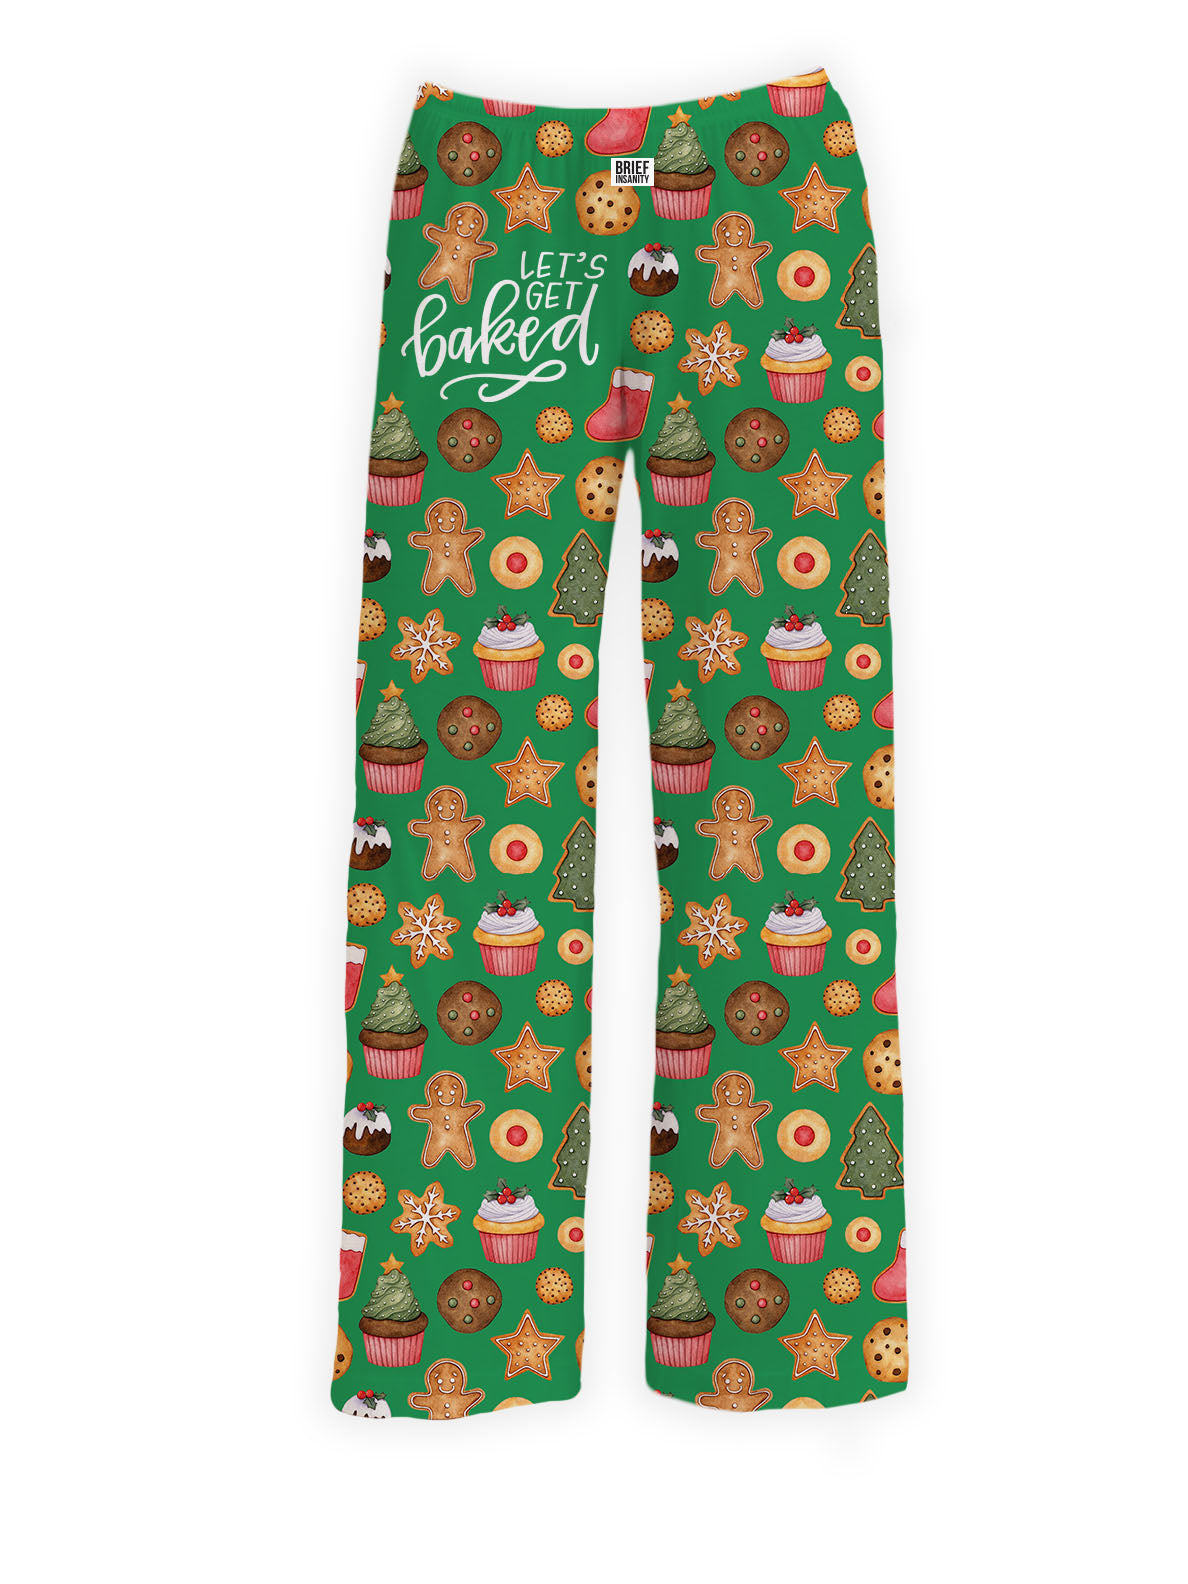 Let's get Baked Pajama Lounge Pants